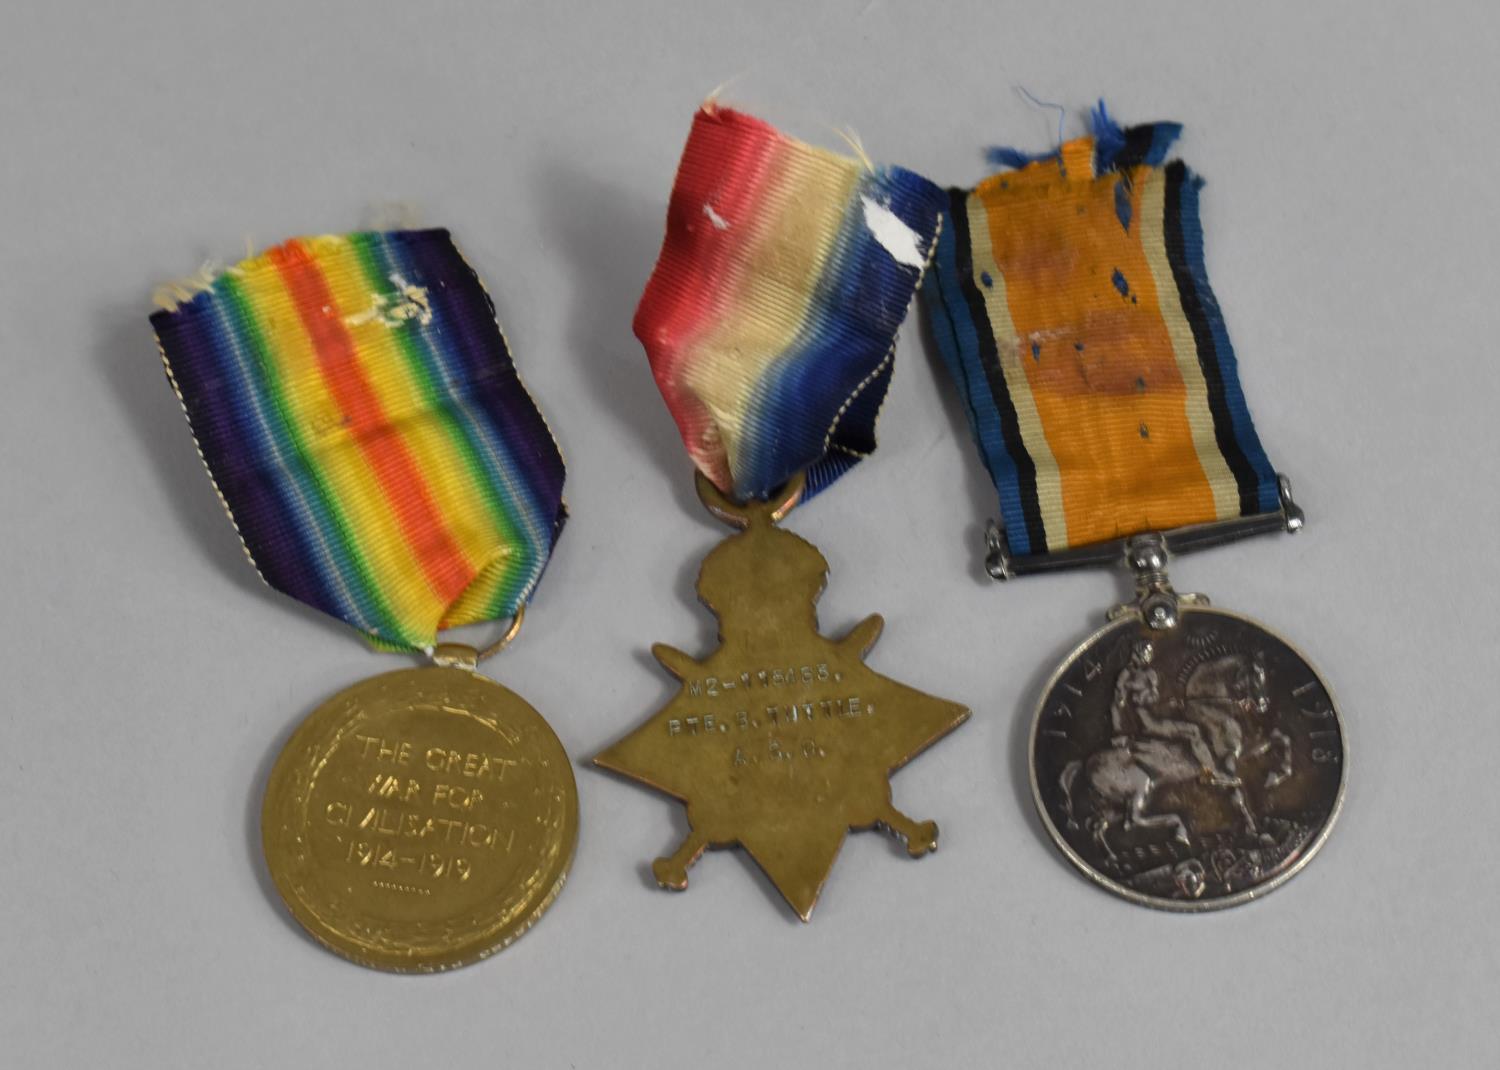 A Collection of Three WWI Medals Awarded to B Tuttle, Army Service Corps - Image 3 of 3